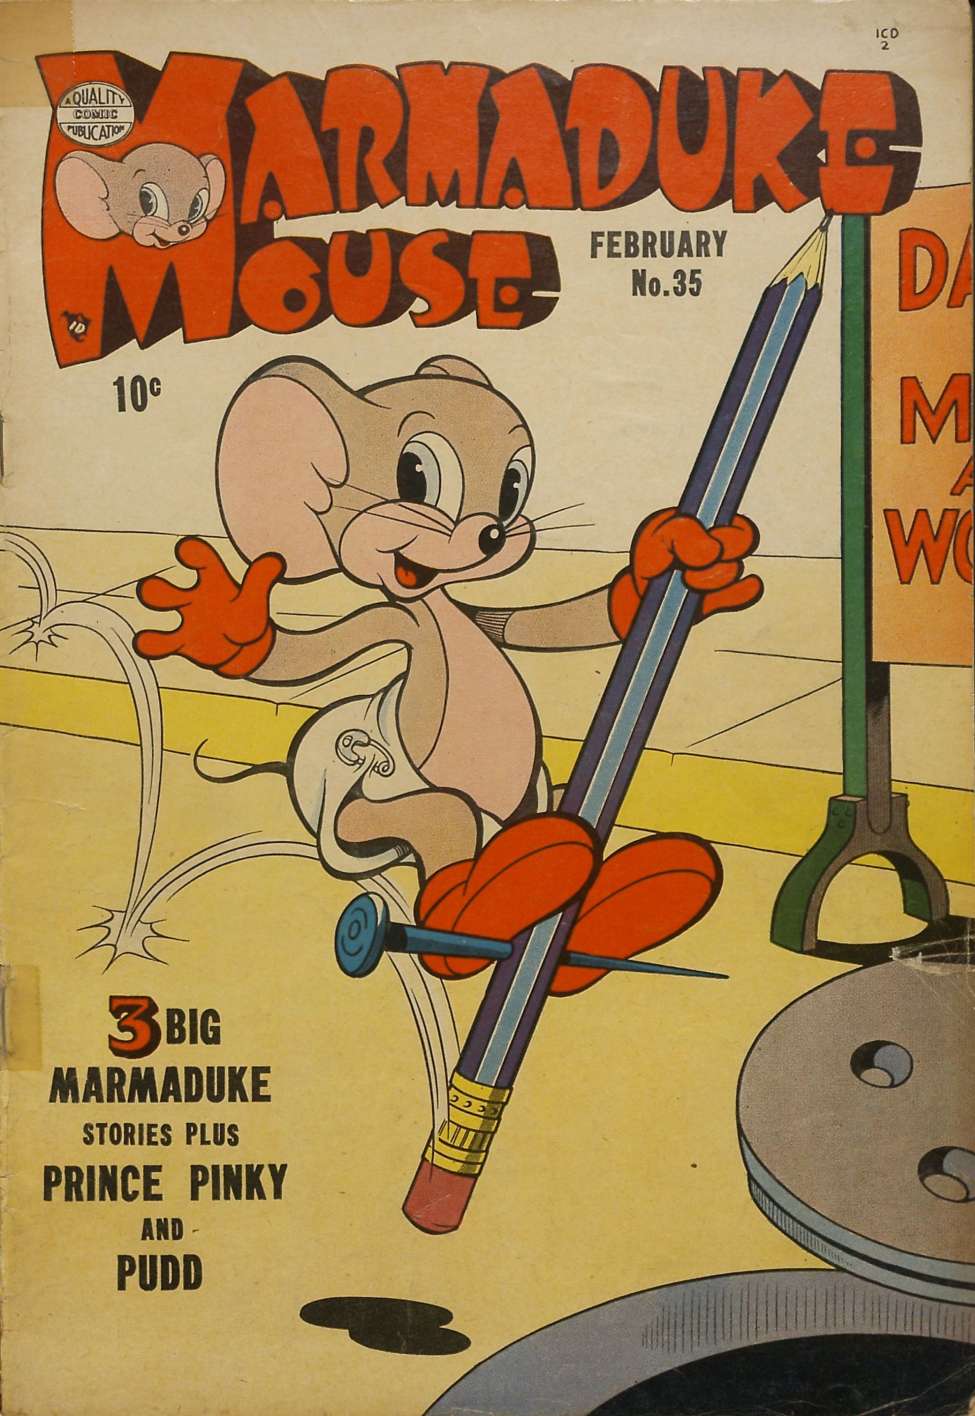 Book Cover For Marmaduke Mouse 35